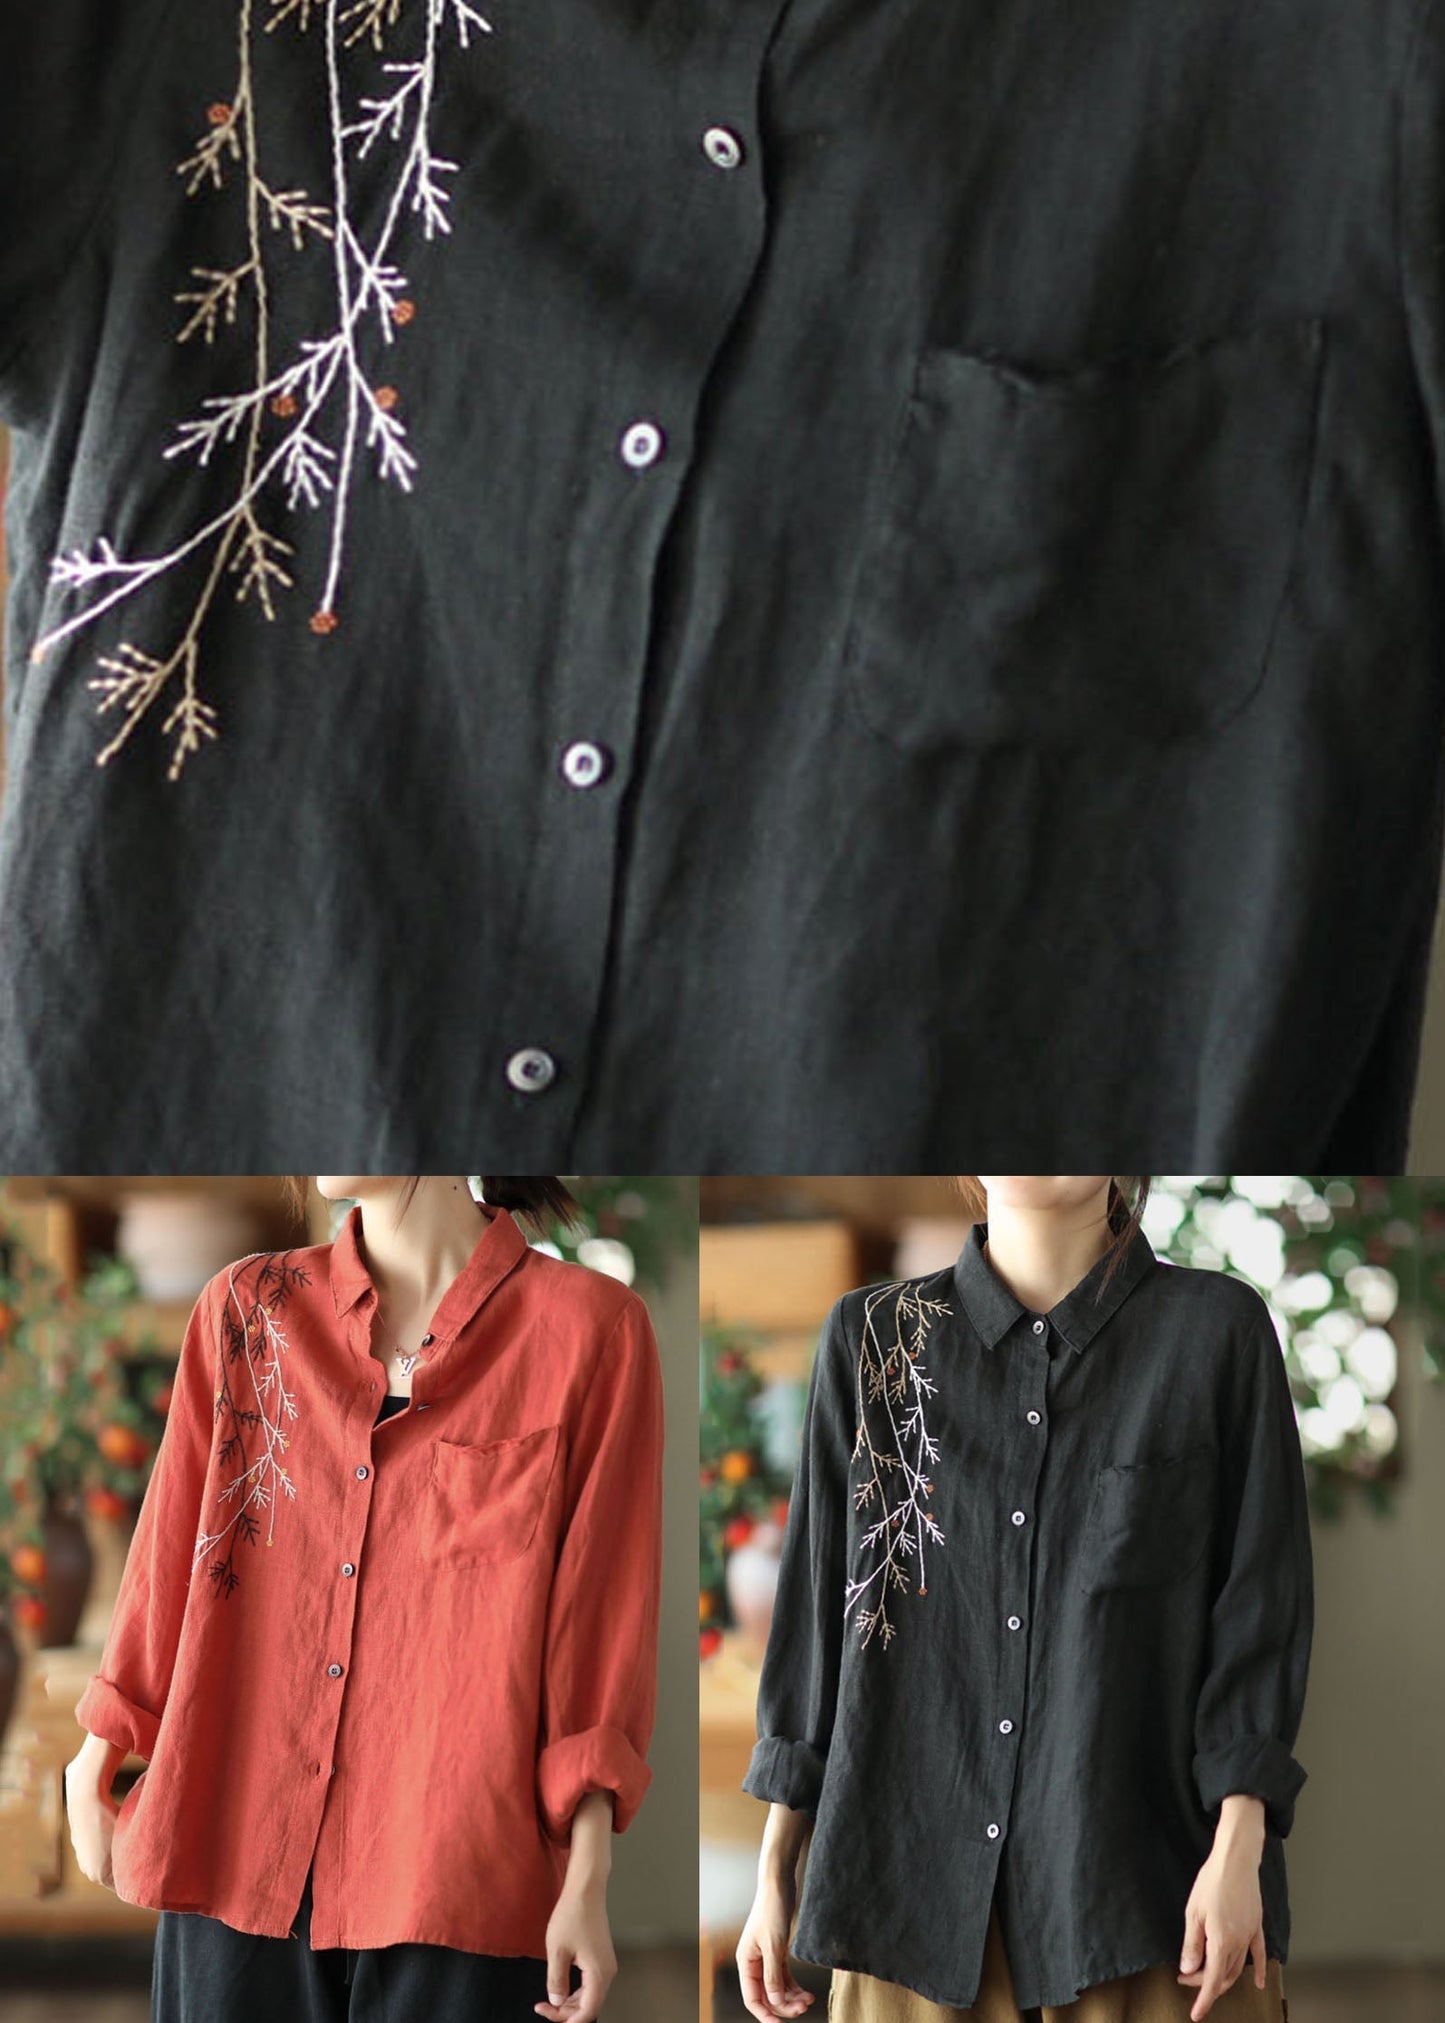 Black Patchwork Linen Shirt Top Embroideried Button Spring LY6189 - fabuloryshop